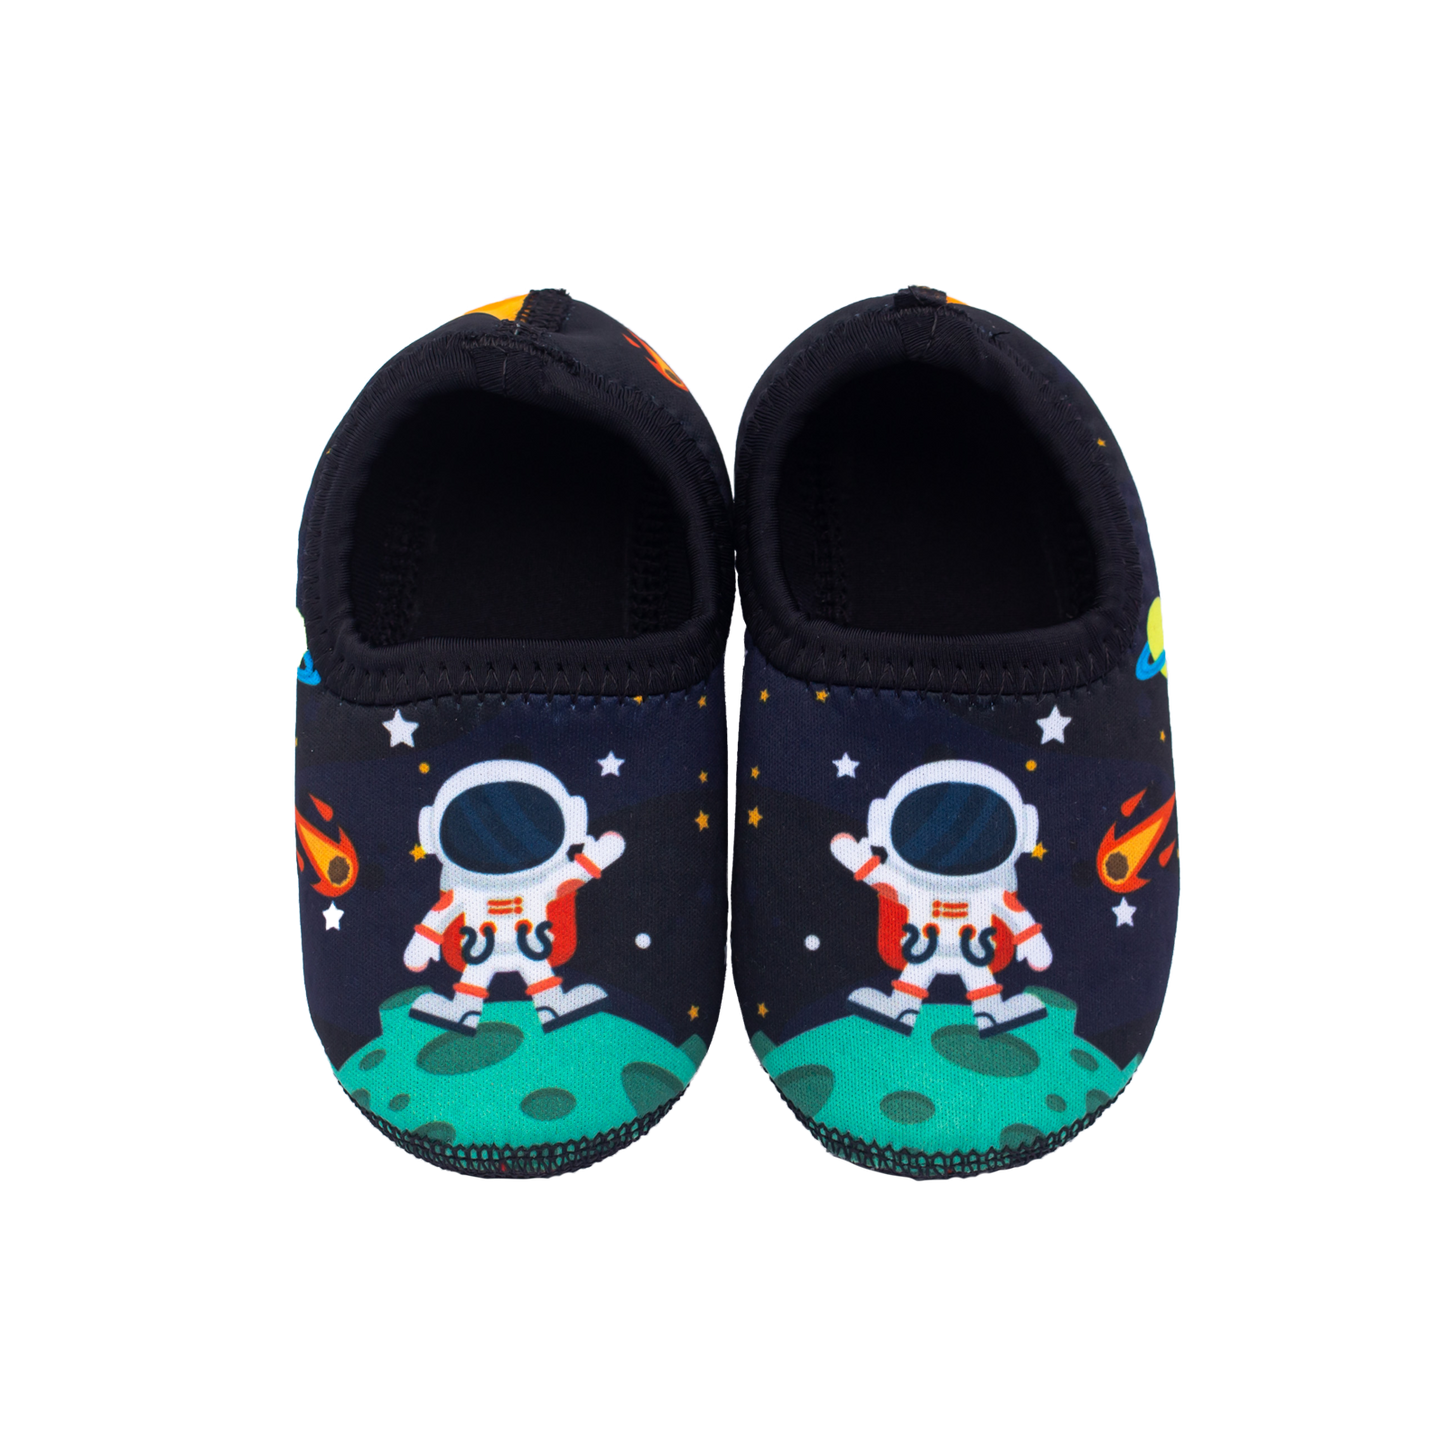 Ufrog Water Shoes - Astroboy